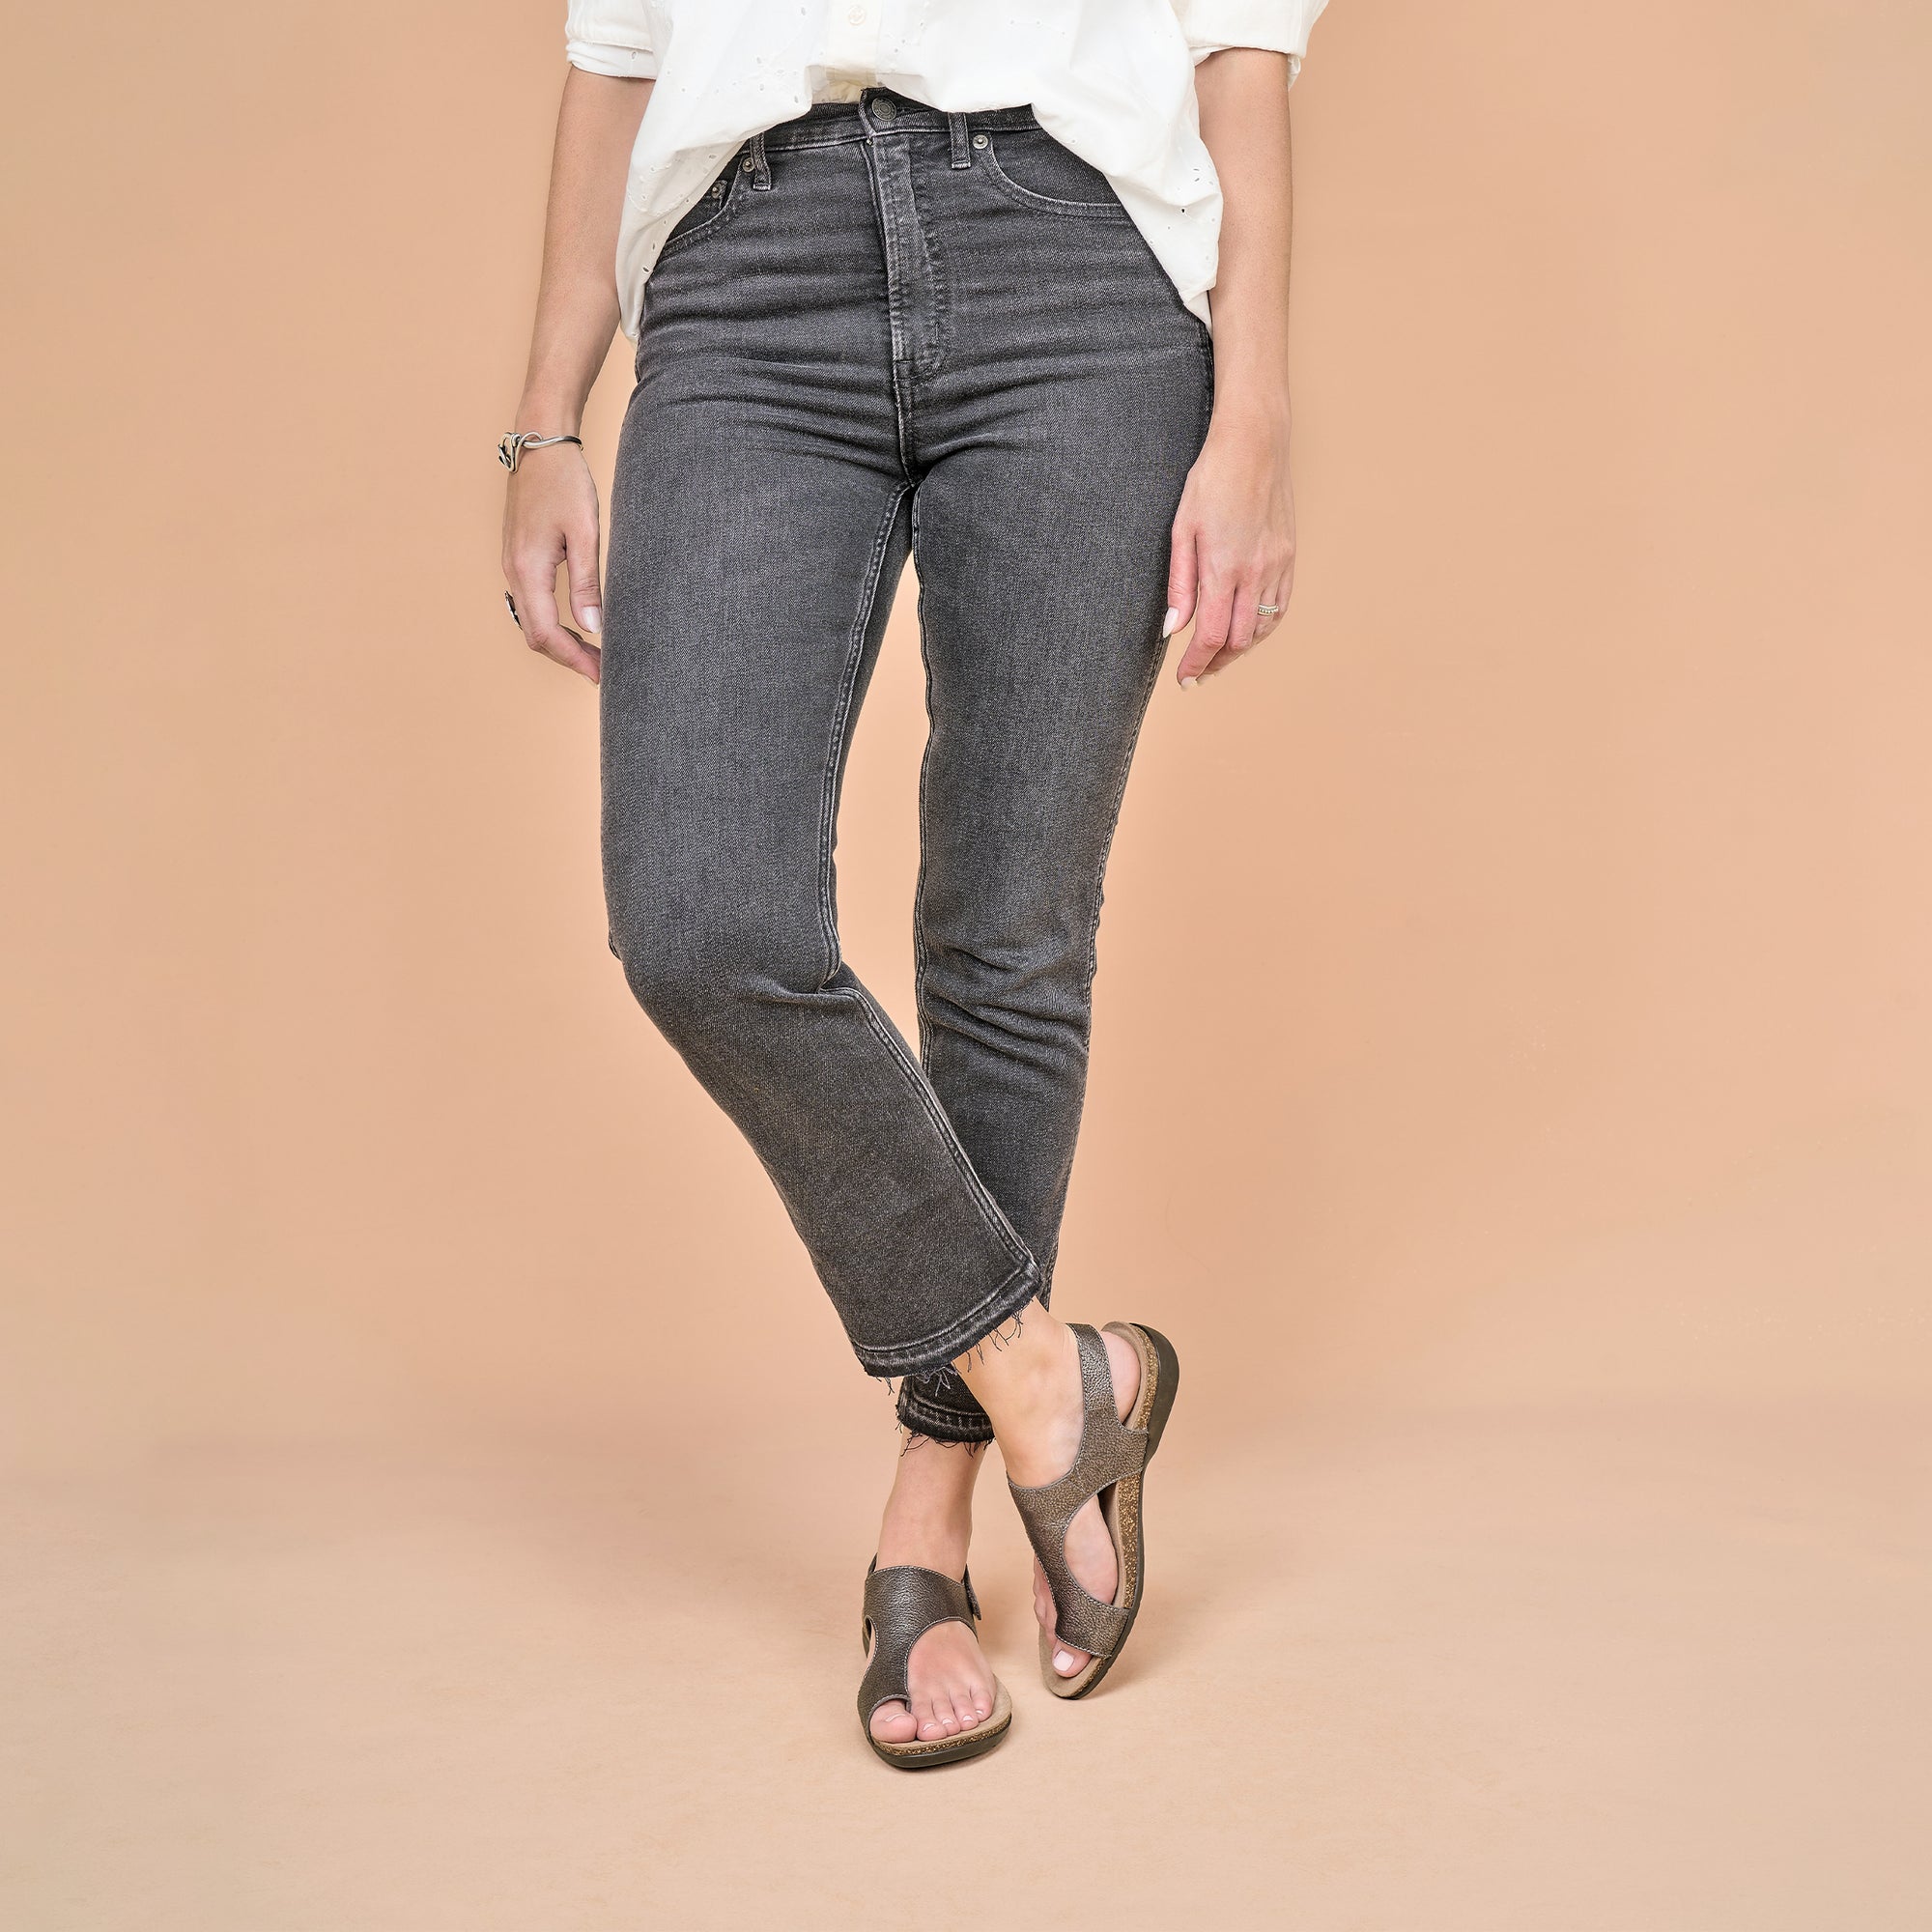 Metallic leather flat sandals shown worn with black jeans.